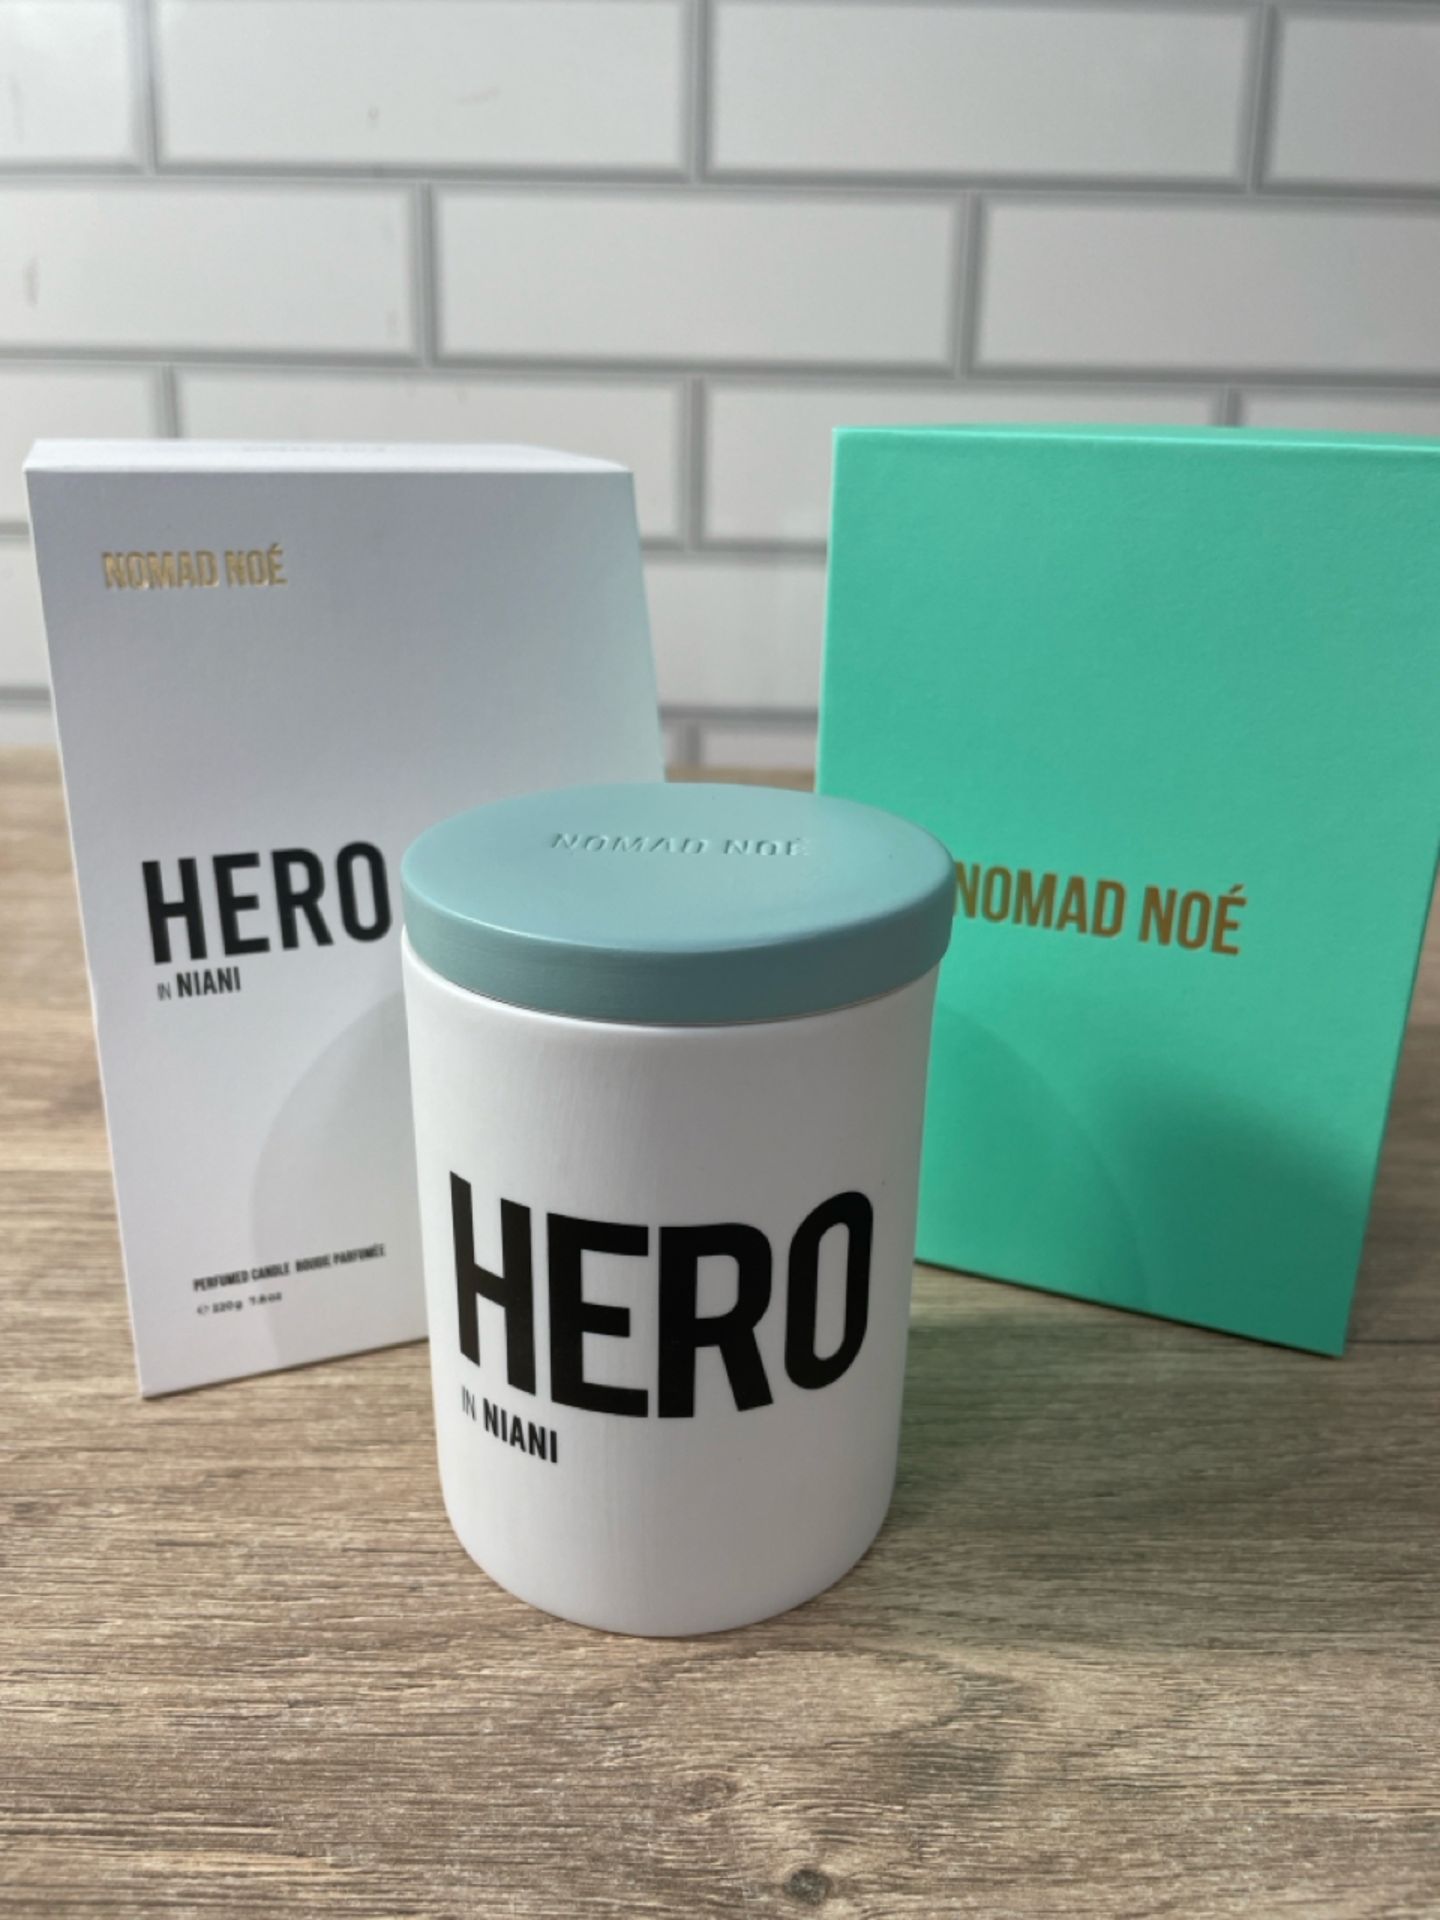 Hero Scented Candle from Nomad Noe - Bild 5 aus 5